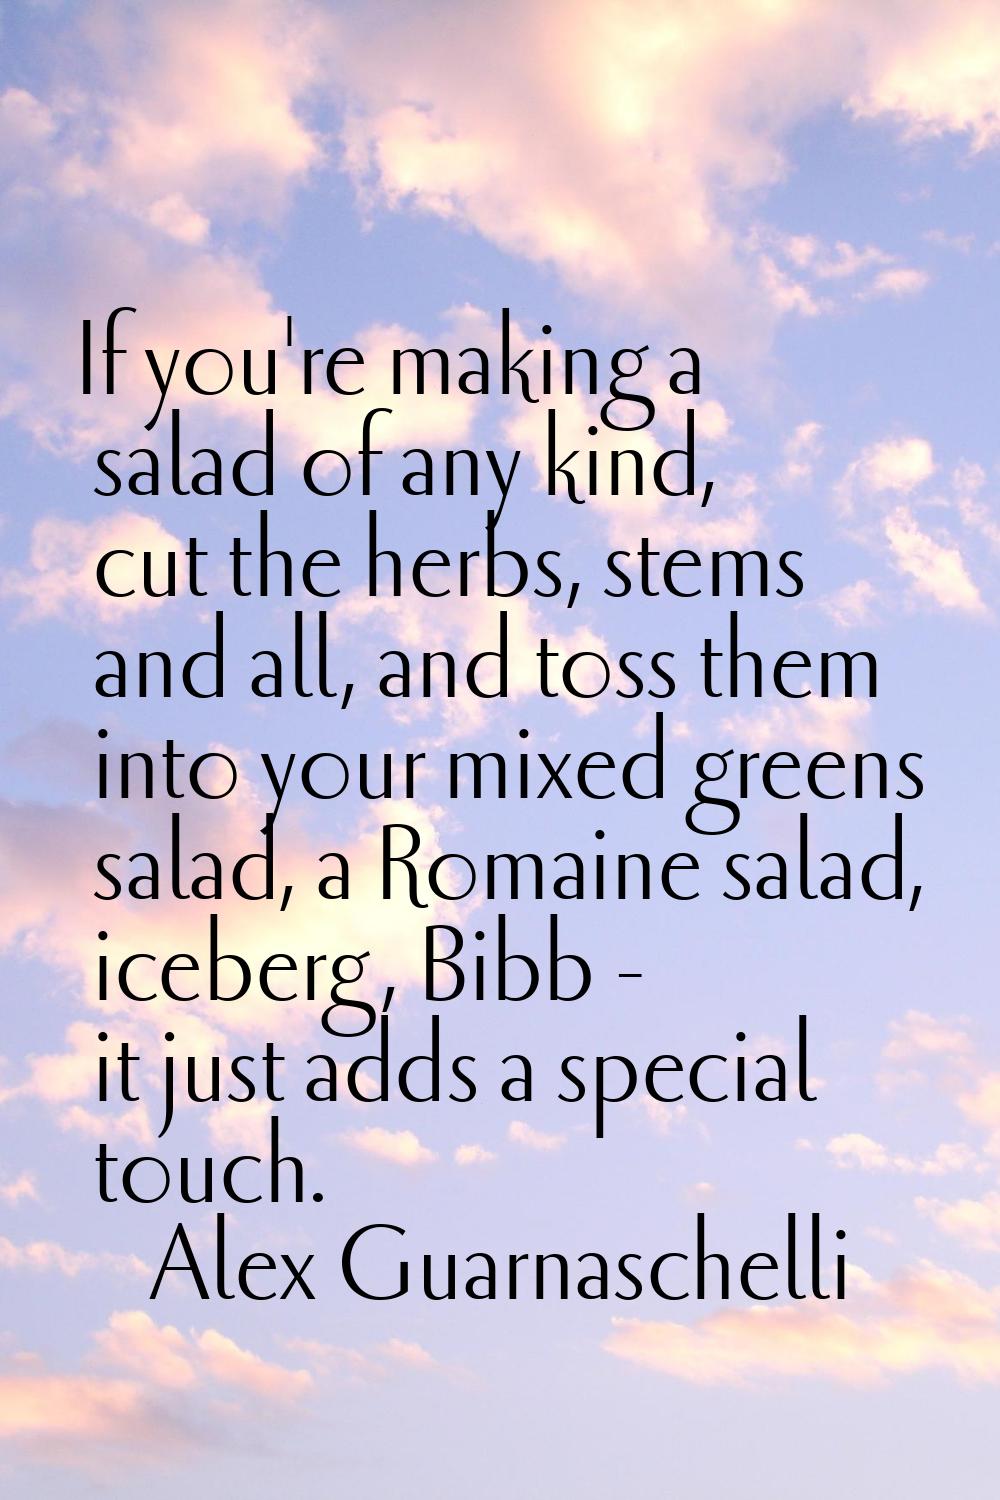 If you're making a salad of any kind, cut the herbs, stems and all, and toss them into your mixed g